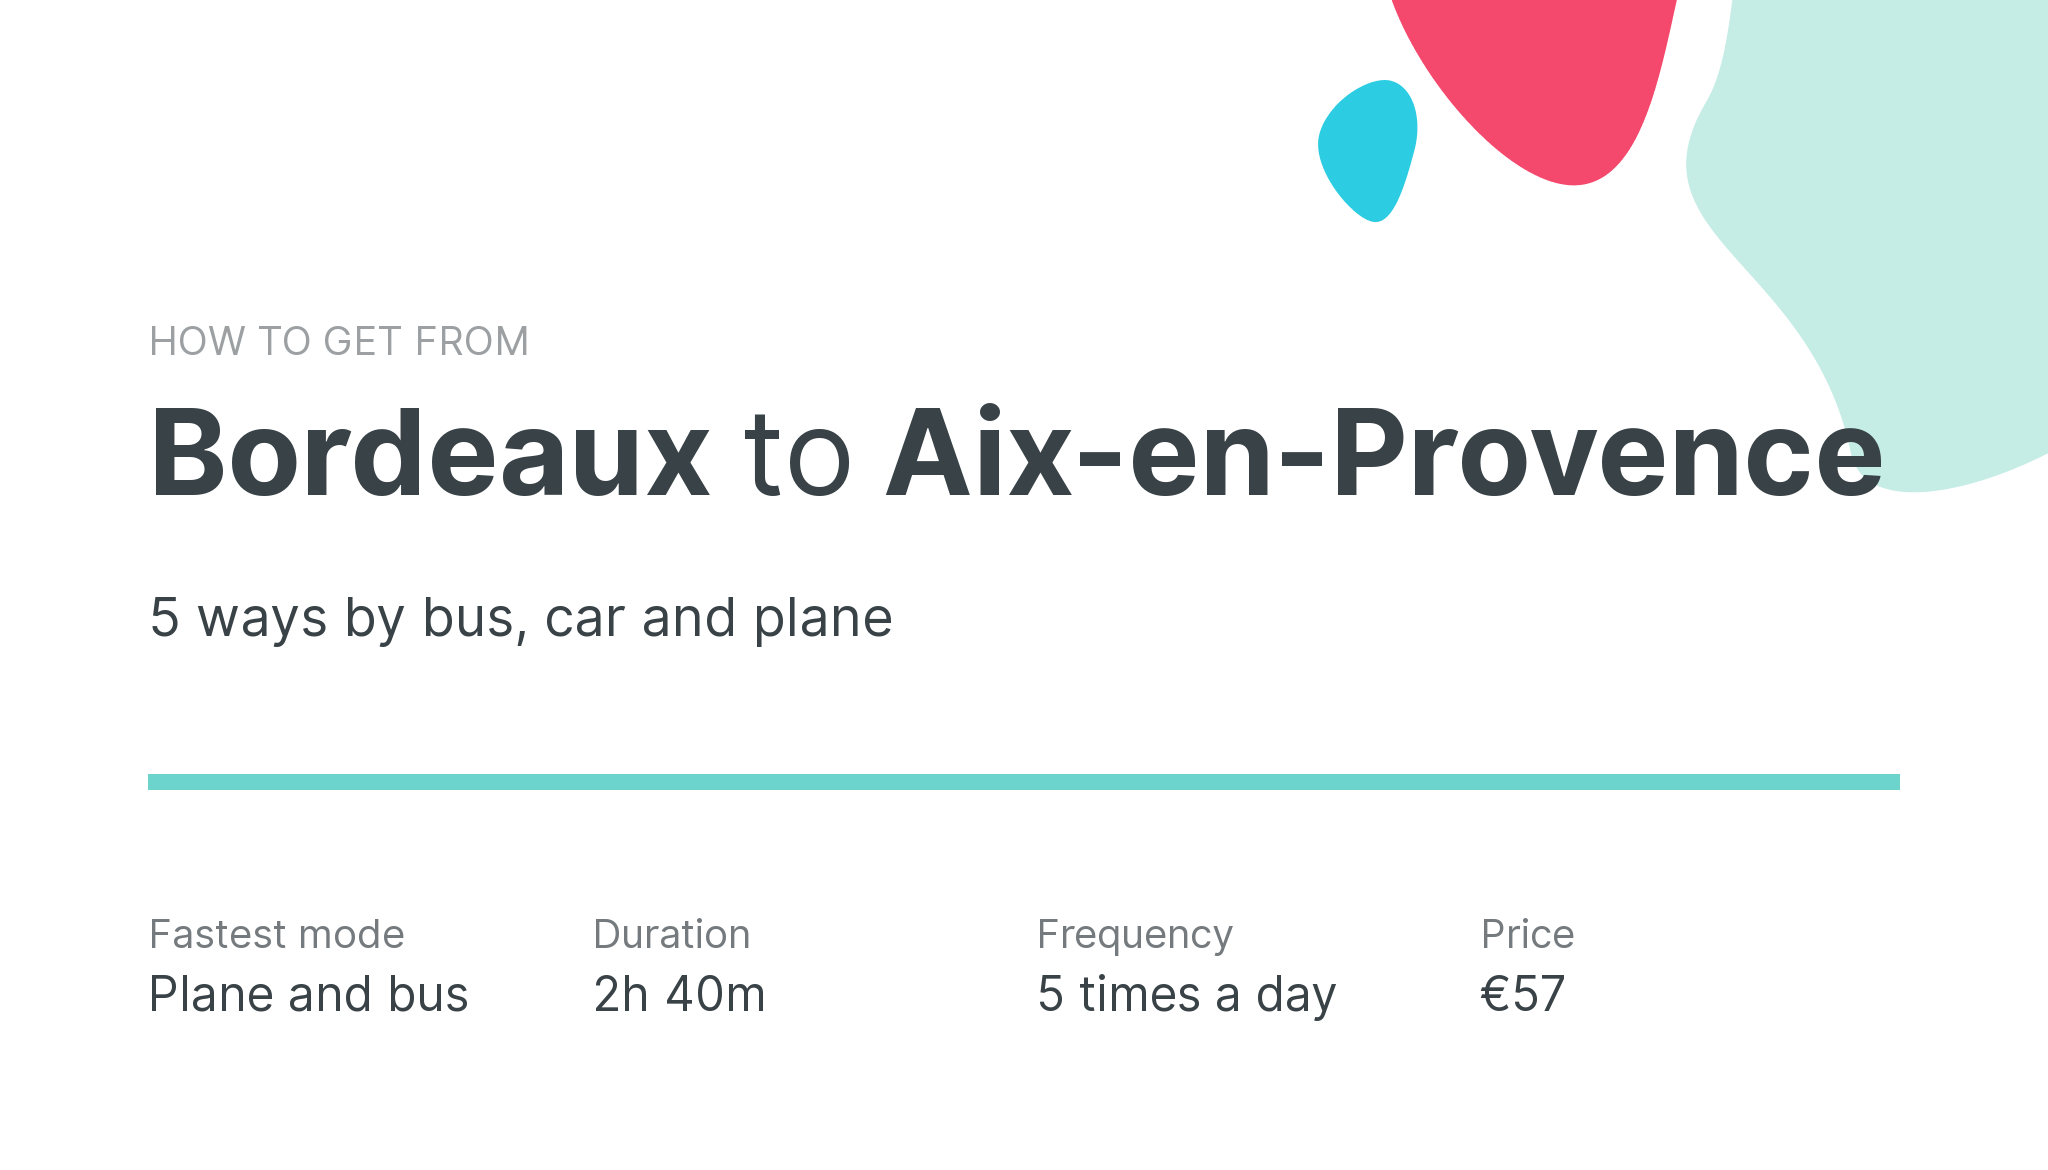 How do I get from Bordeaux to Aix-en-Provence